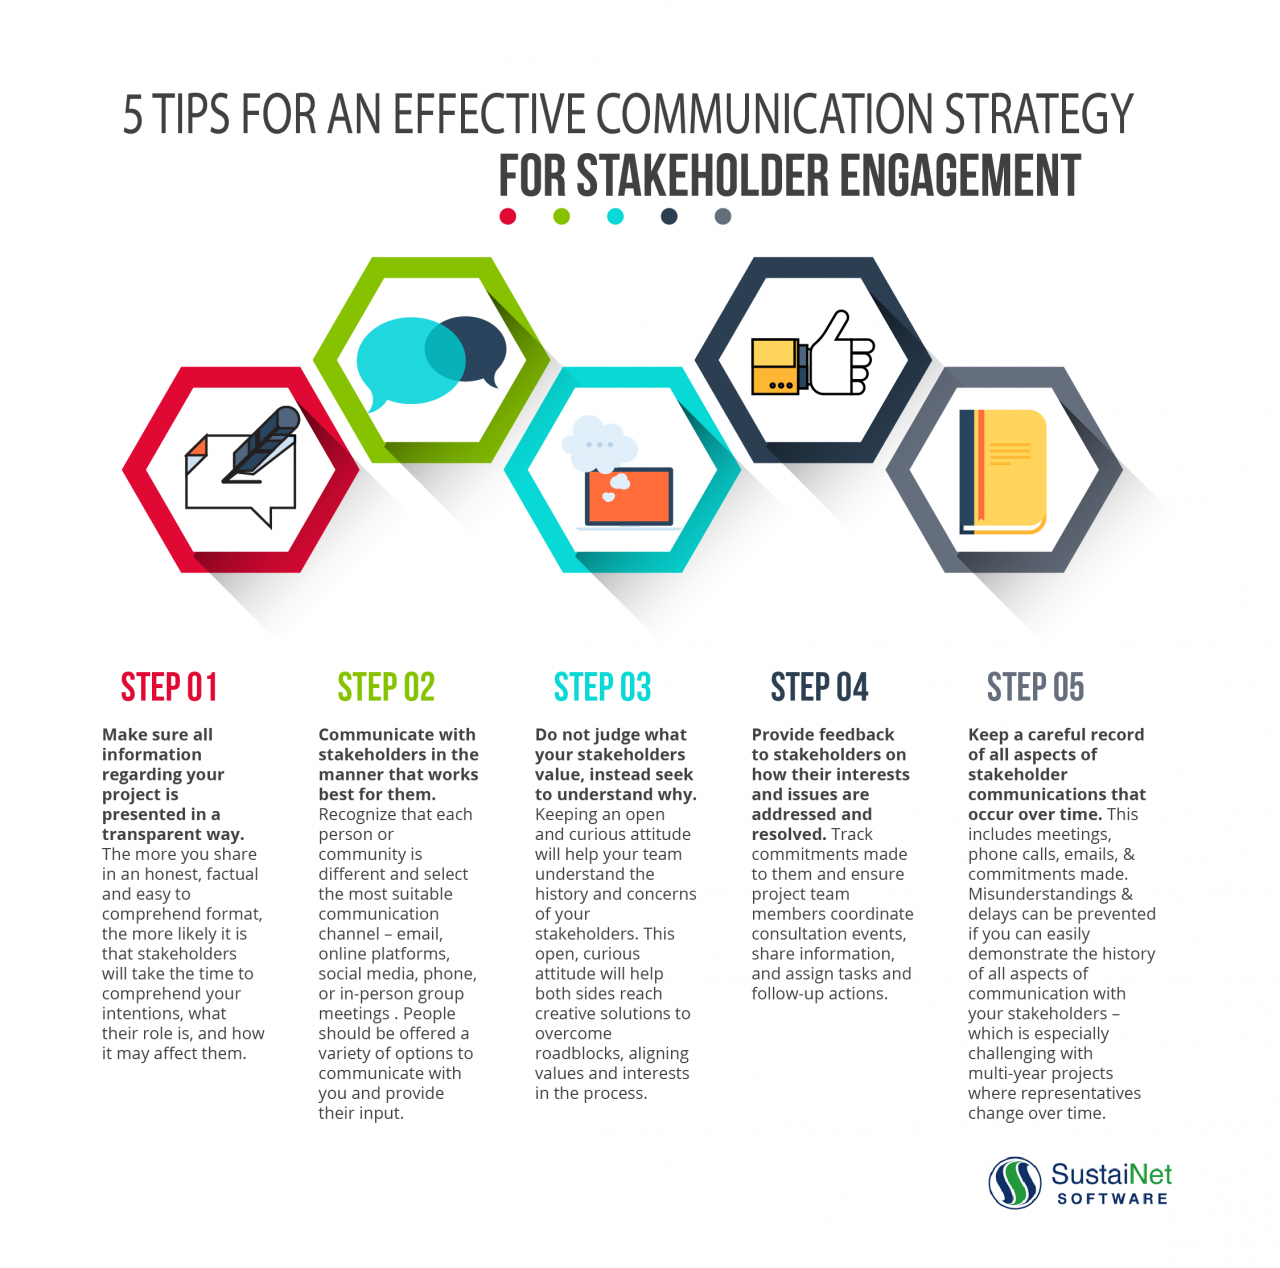 An action strategy for business communication is